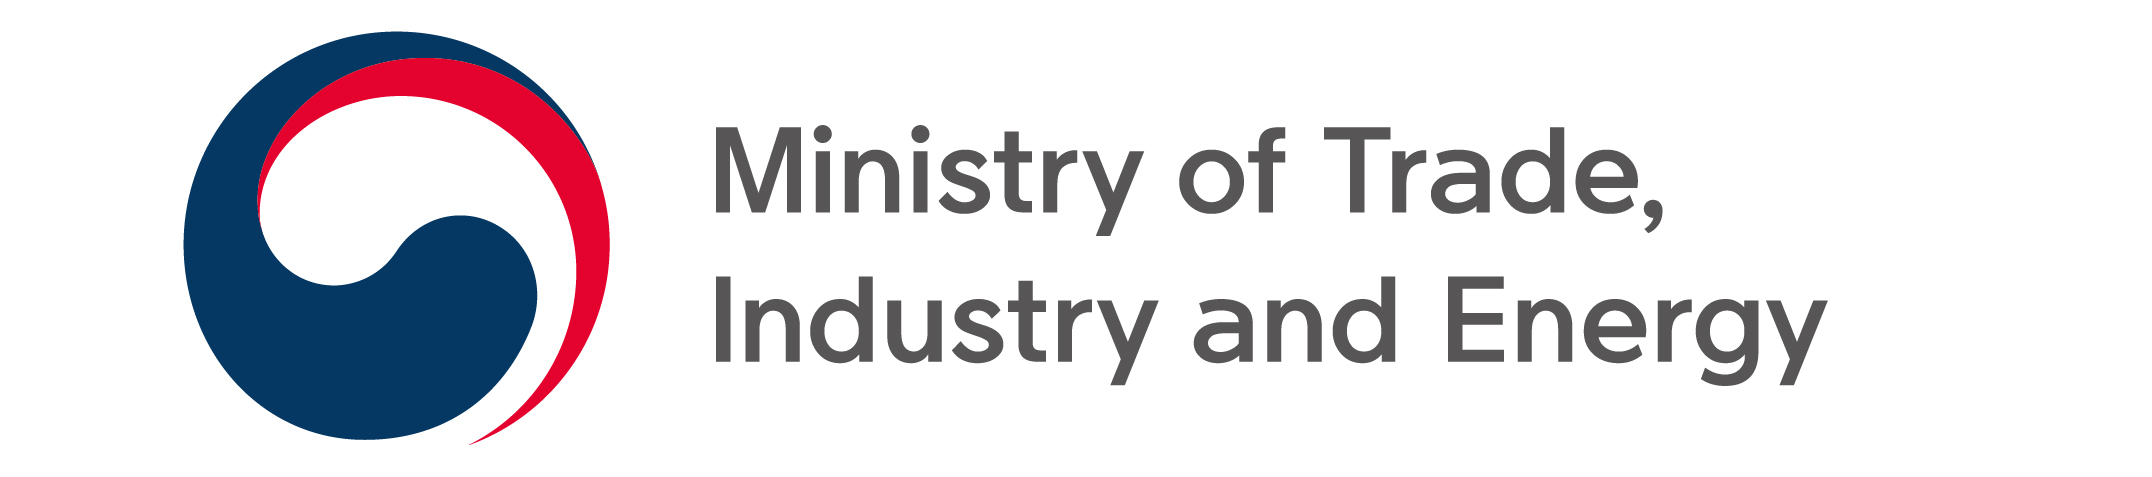 Ministry of Trade Industry and Energy (MOTIE), Korea